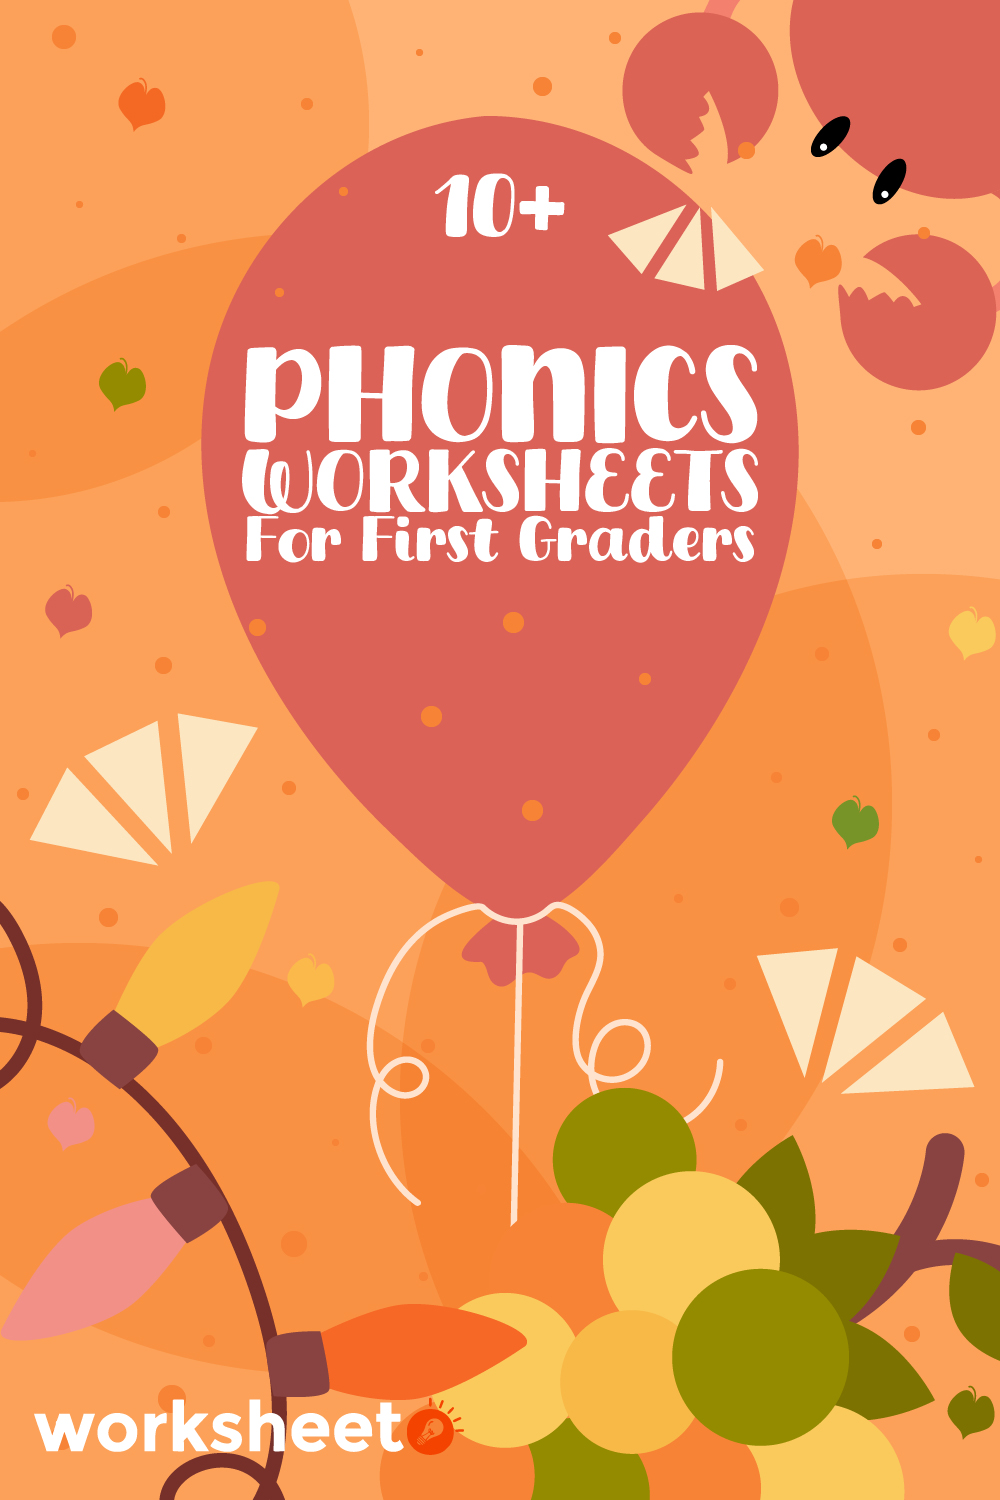 Phonics Worksheets for First Graders